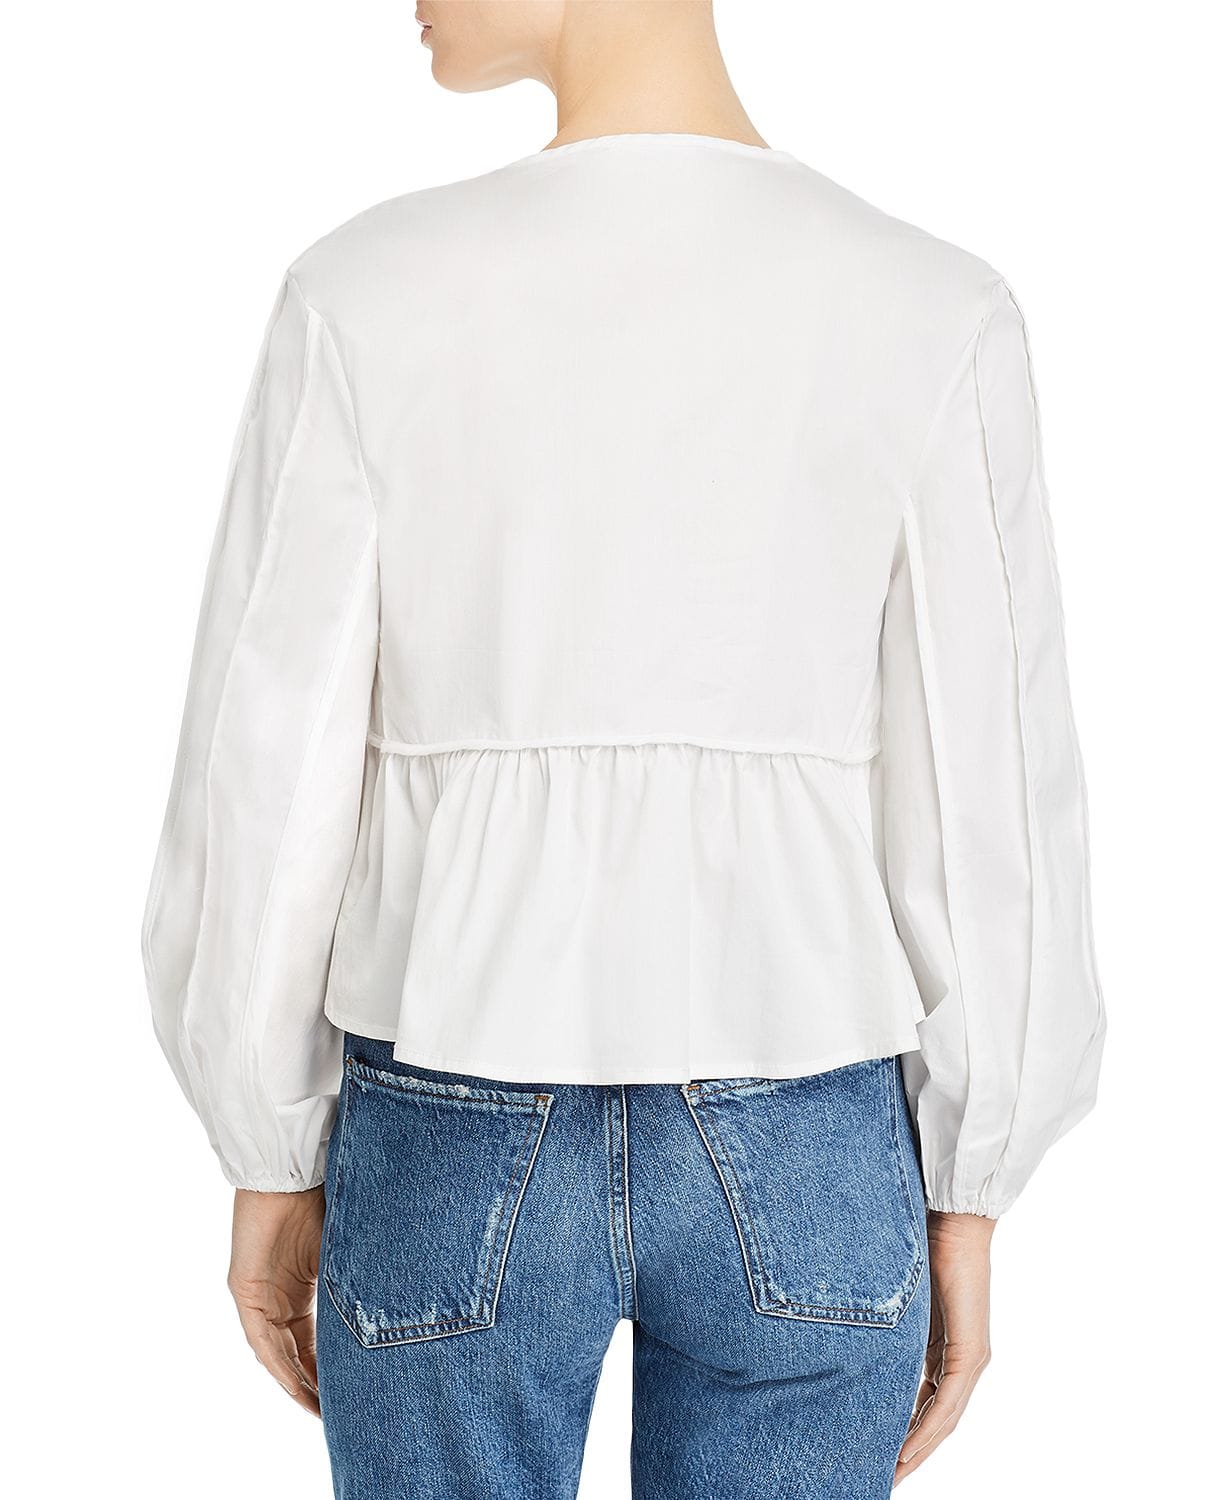 woocommerce-673321-2209615.cloudwaysapps.com-cmeo-collective-womens-white-lie-awake-long-sleeve-ruffled-top